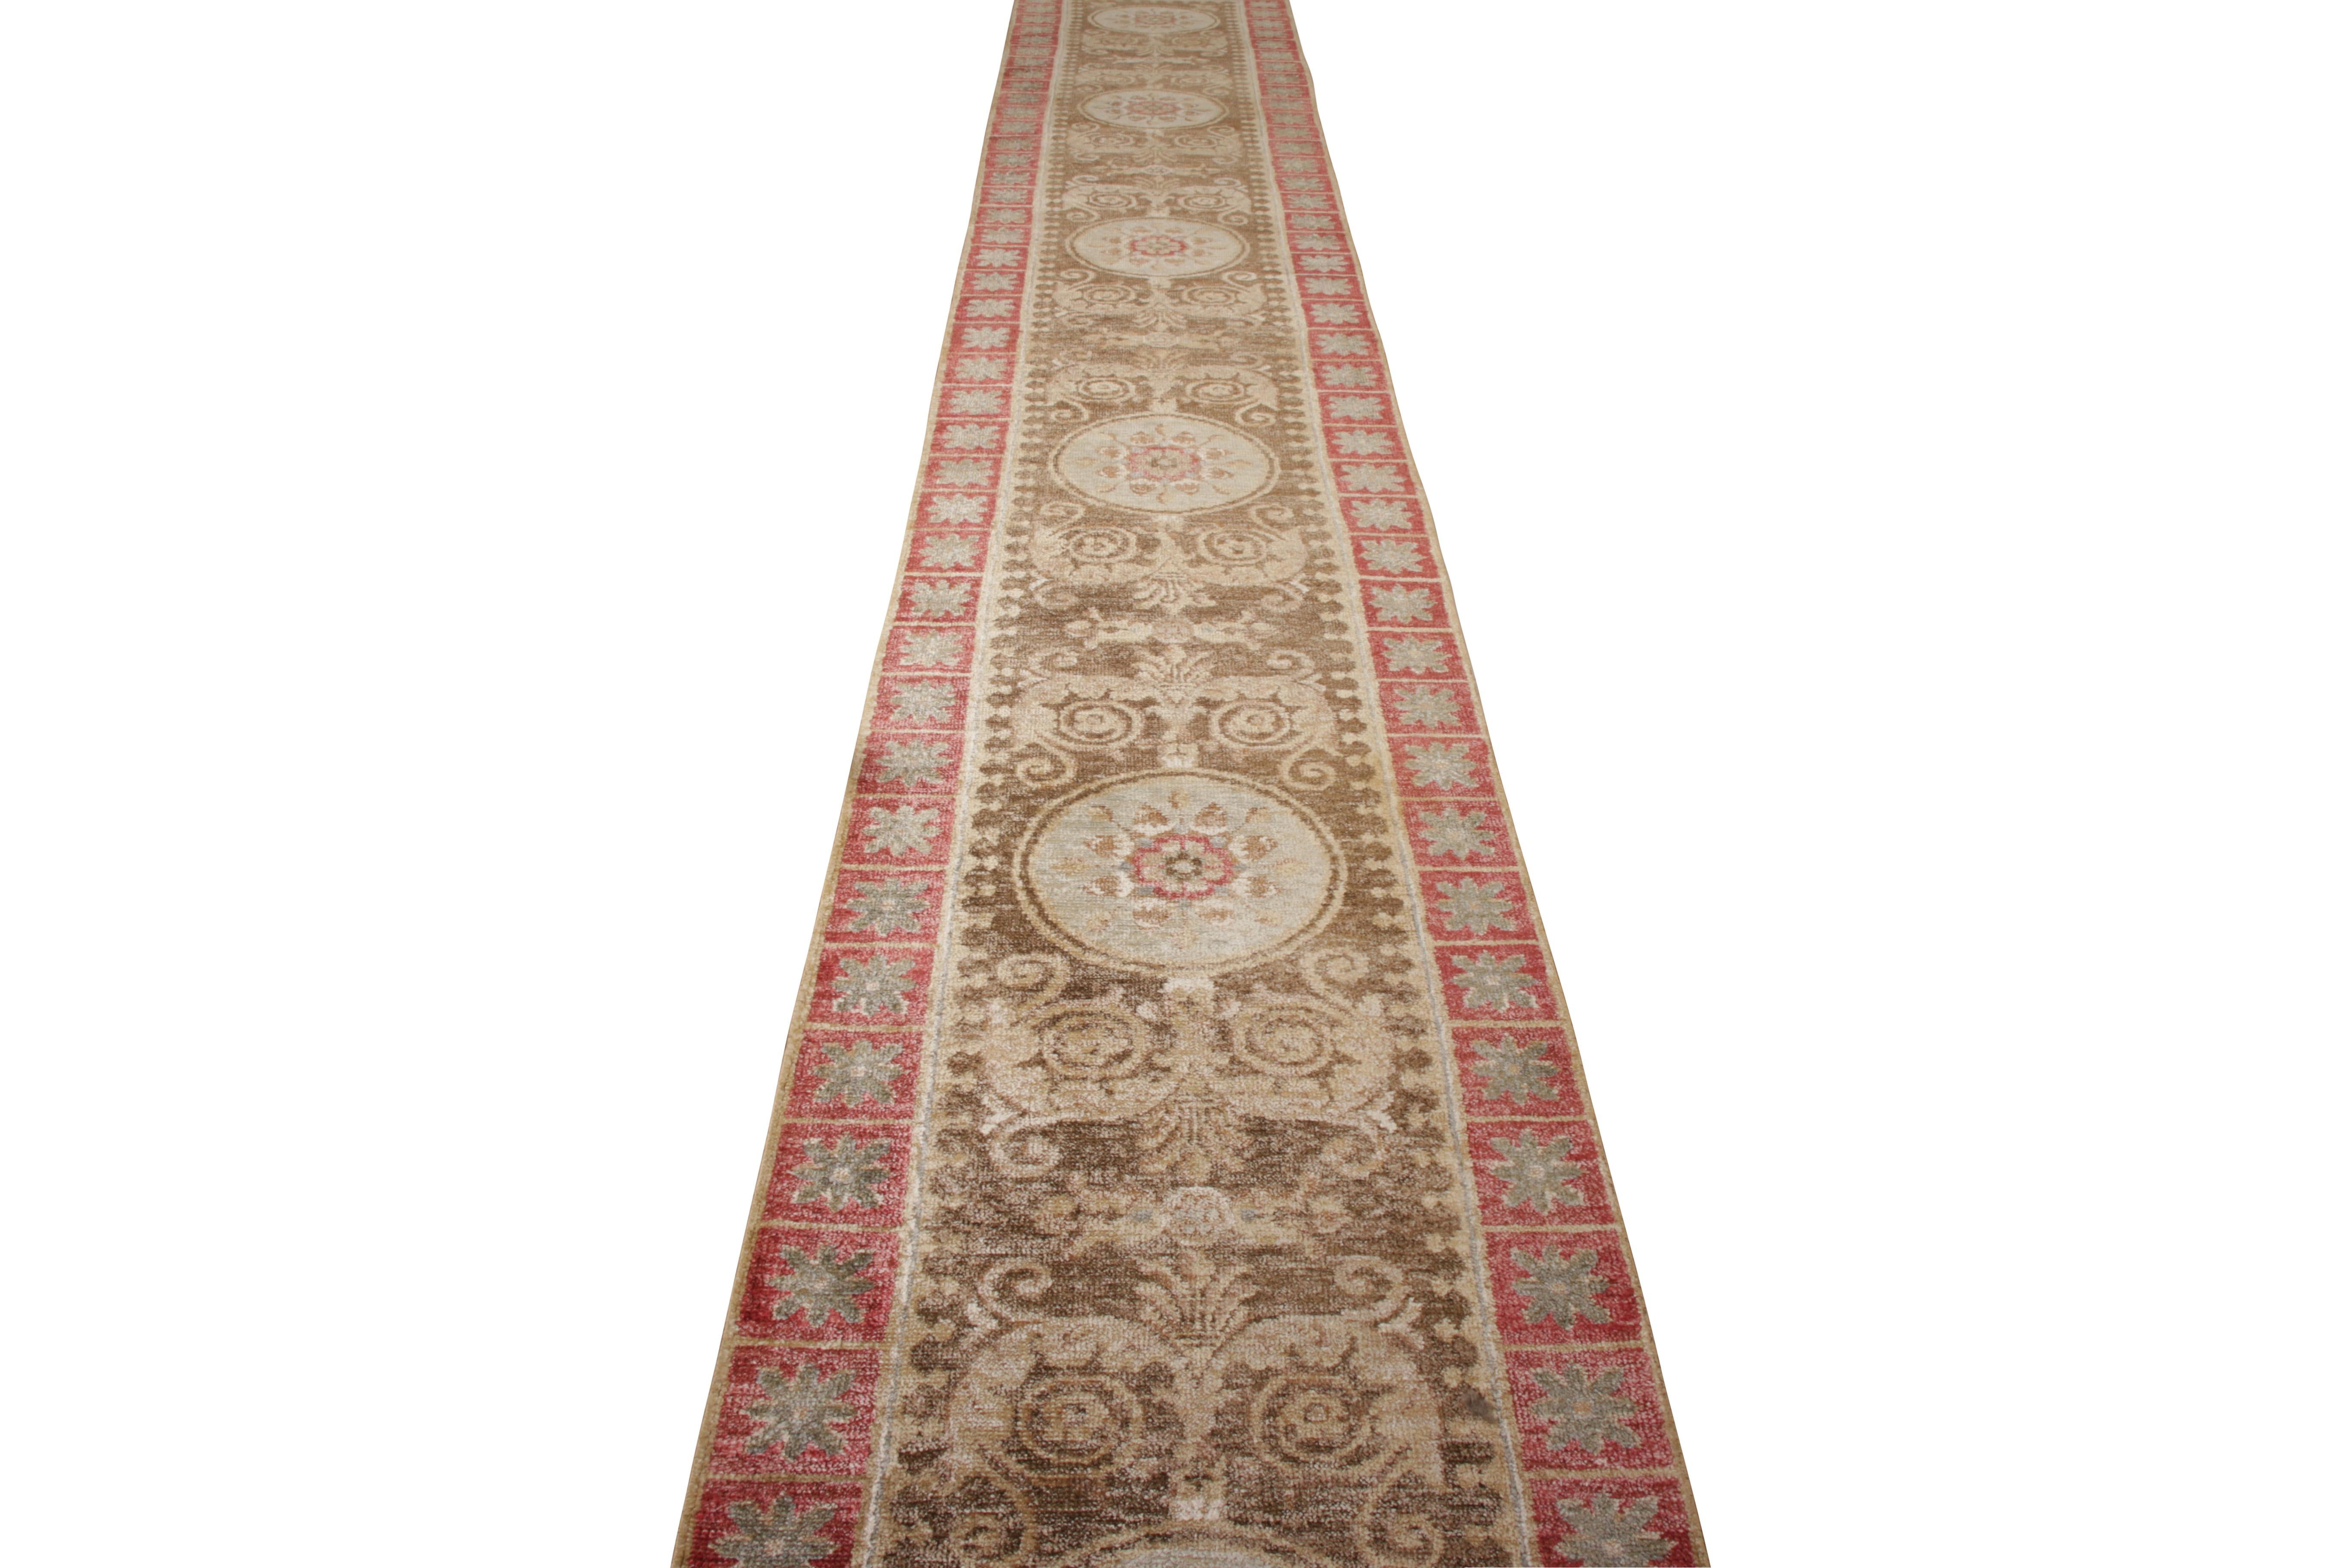 A brilliant 3×22 runner nodding to classic transitional rug styles, from Rug & Kilim’s Modern Classics Collection. Hand knotted in wool, enjoying repeating medallion floral patterns in a forgiving, subtle blue within beige-brown and red. Exceptional